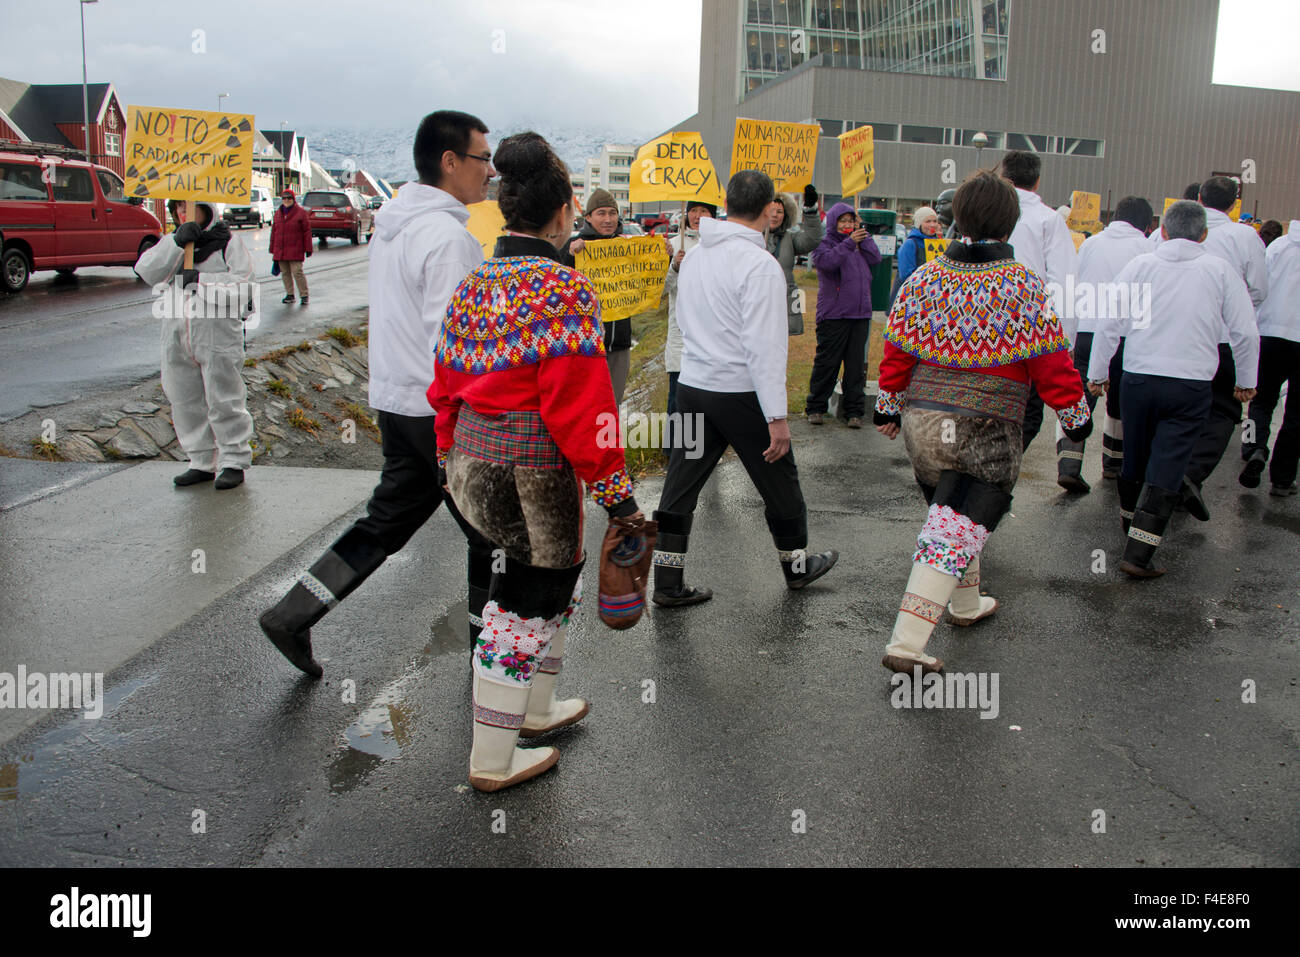 Greenland, Nuuk (aka Godthab). Protestors demonstrating in front of parliament (in traditional attire) against nuclear testing on Greenland's ice sheet. (Large format sizes available) Stock Photo